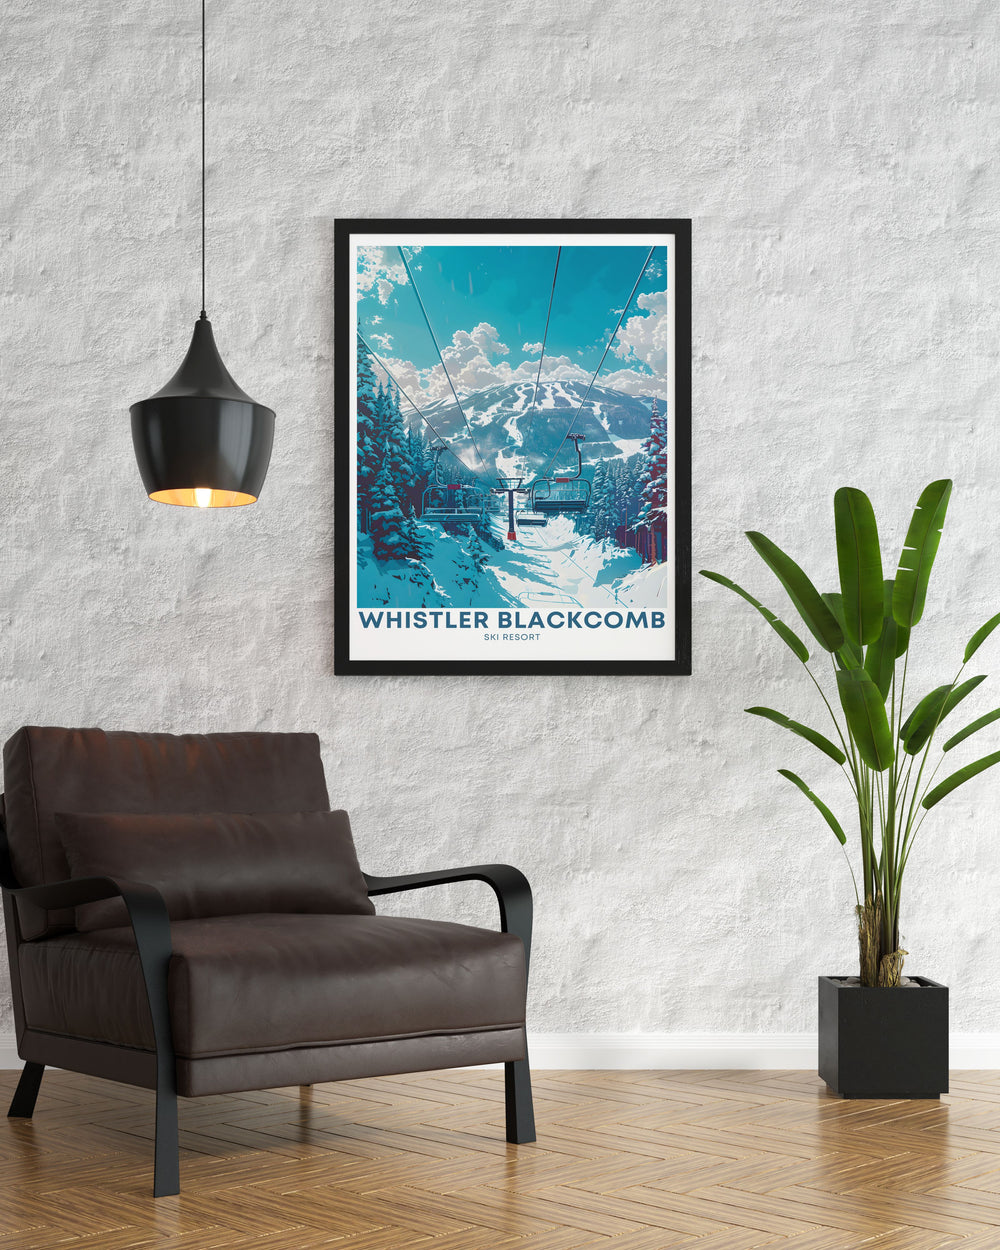 Vintage Whistler peak chair lifts print depicting the iconic chair lifts at Whistler Blackcomb, ideal for winter sports lovers looking to enhance their space with beautiful skiing artwork and snowboarding posters.